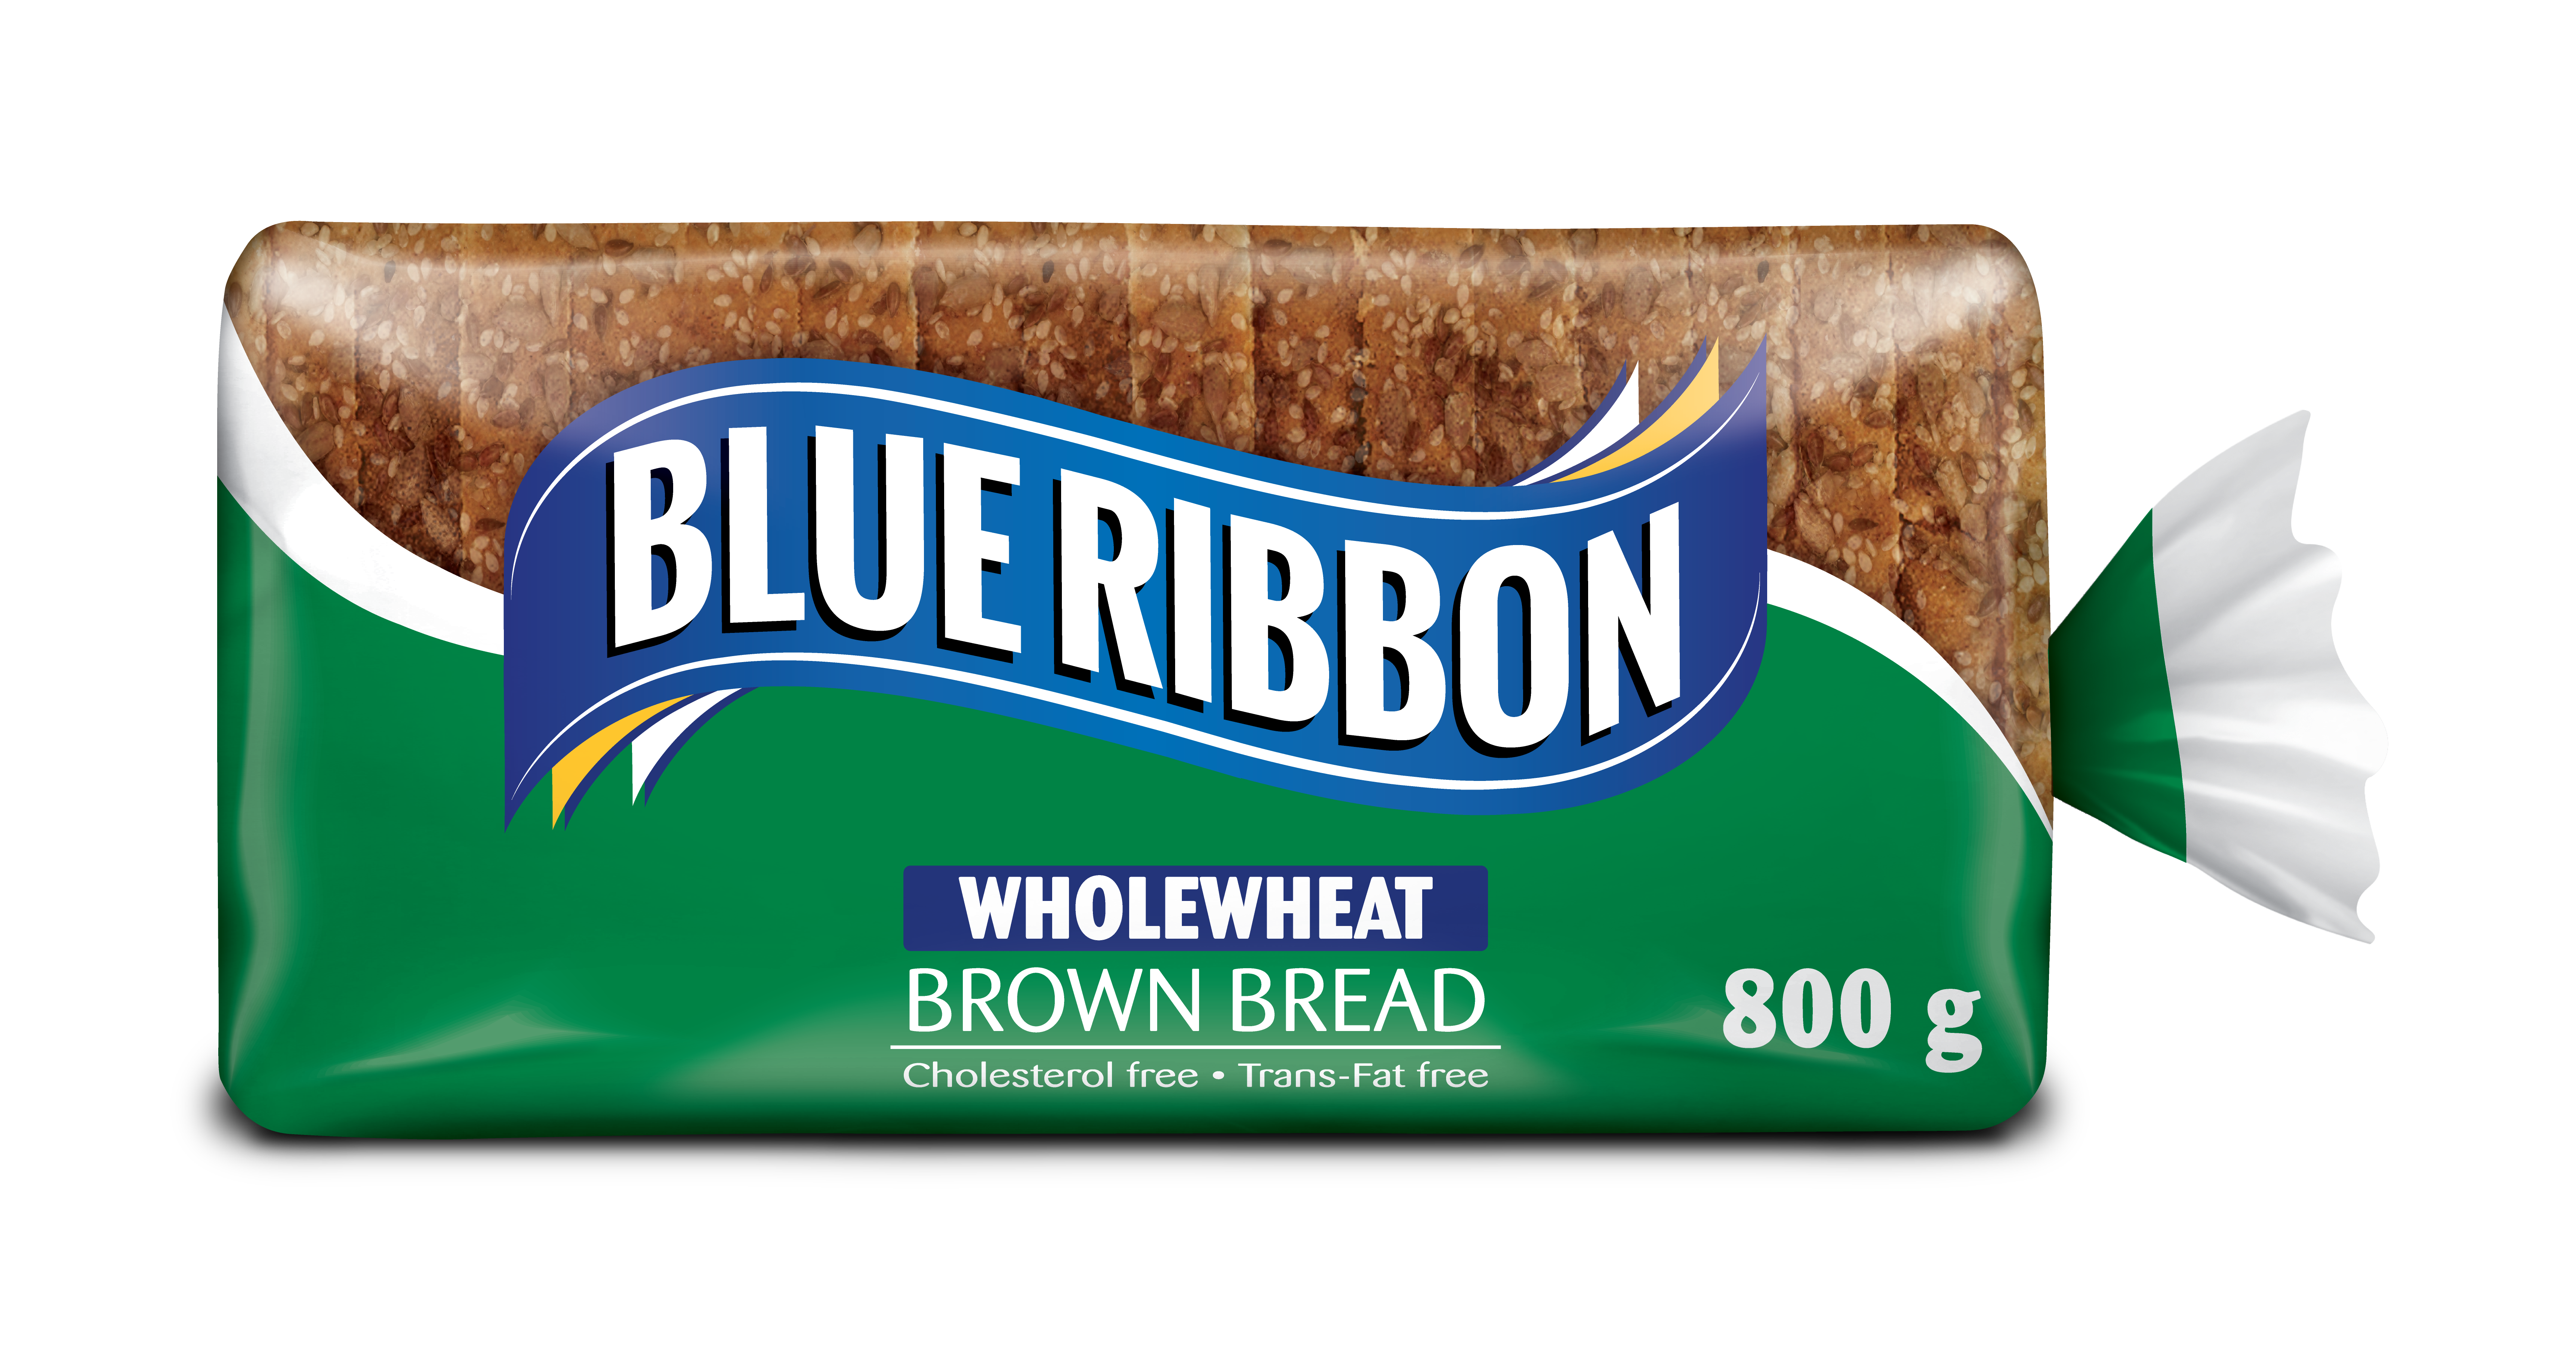 Classic Wholewheat Bread, 700g